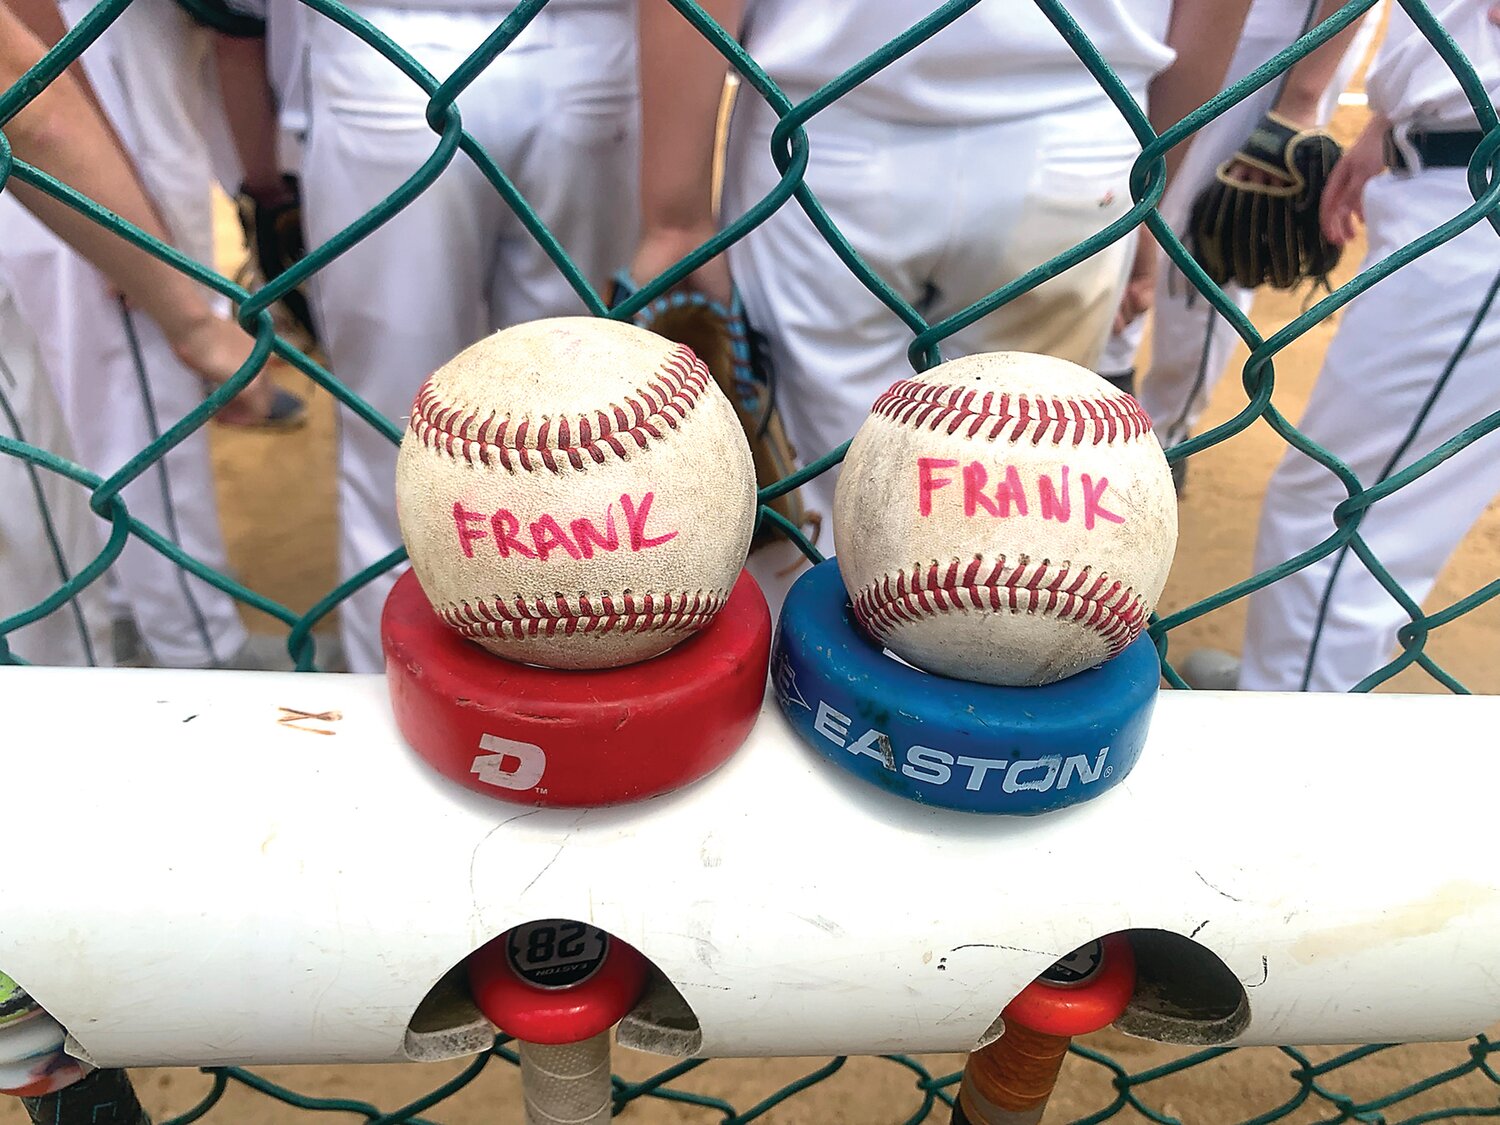 Baseballs left behind in the batting cage by another team’s coach became a source of inspiration for the Rams throughout the season. After they were discovered, the players placed them in the dugout of every game, fueling the team to a 22-4 record the rest of the way.